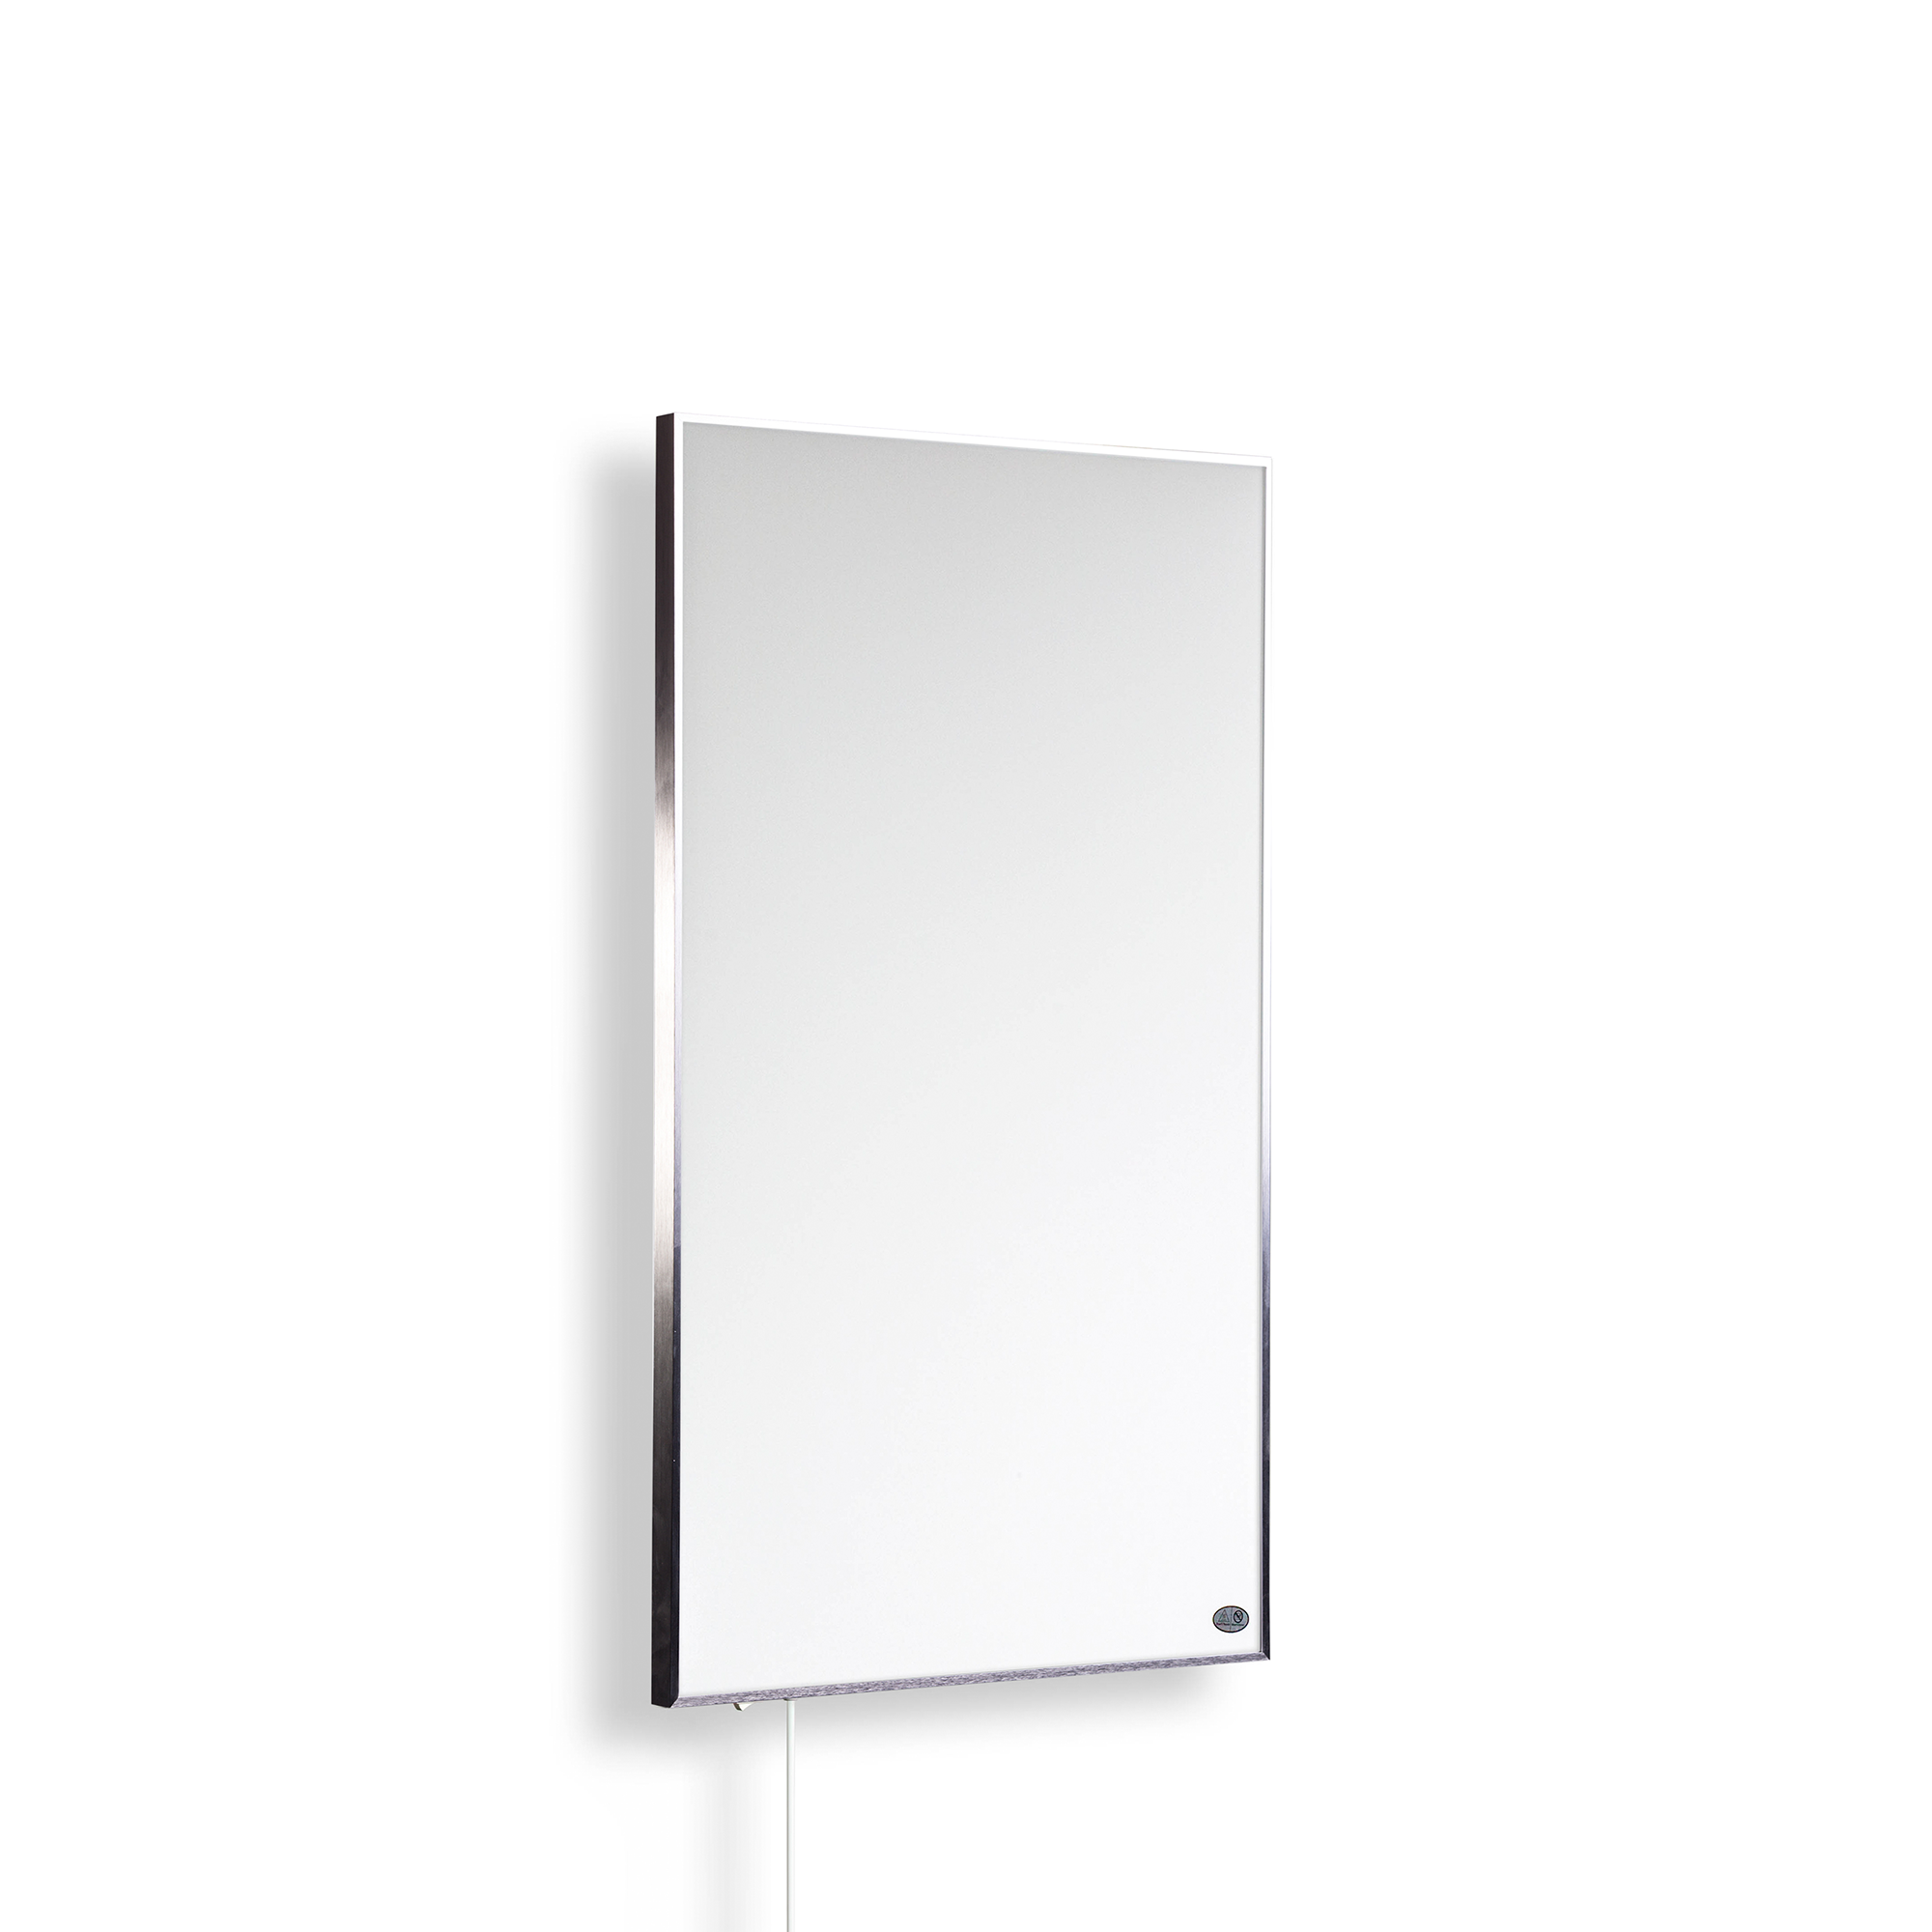 Infrarotheizung 'E-Serie' silbern 600 W + product picture